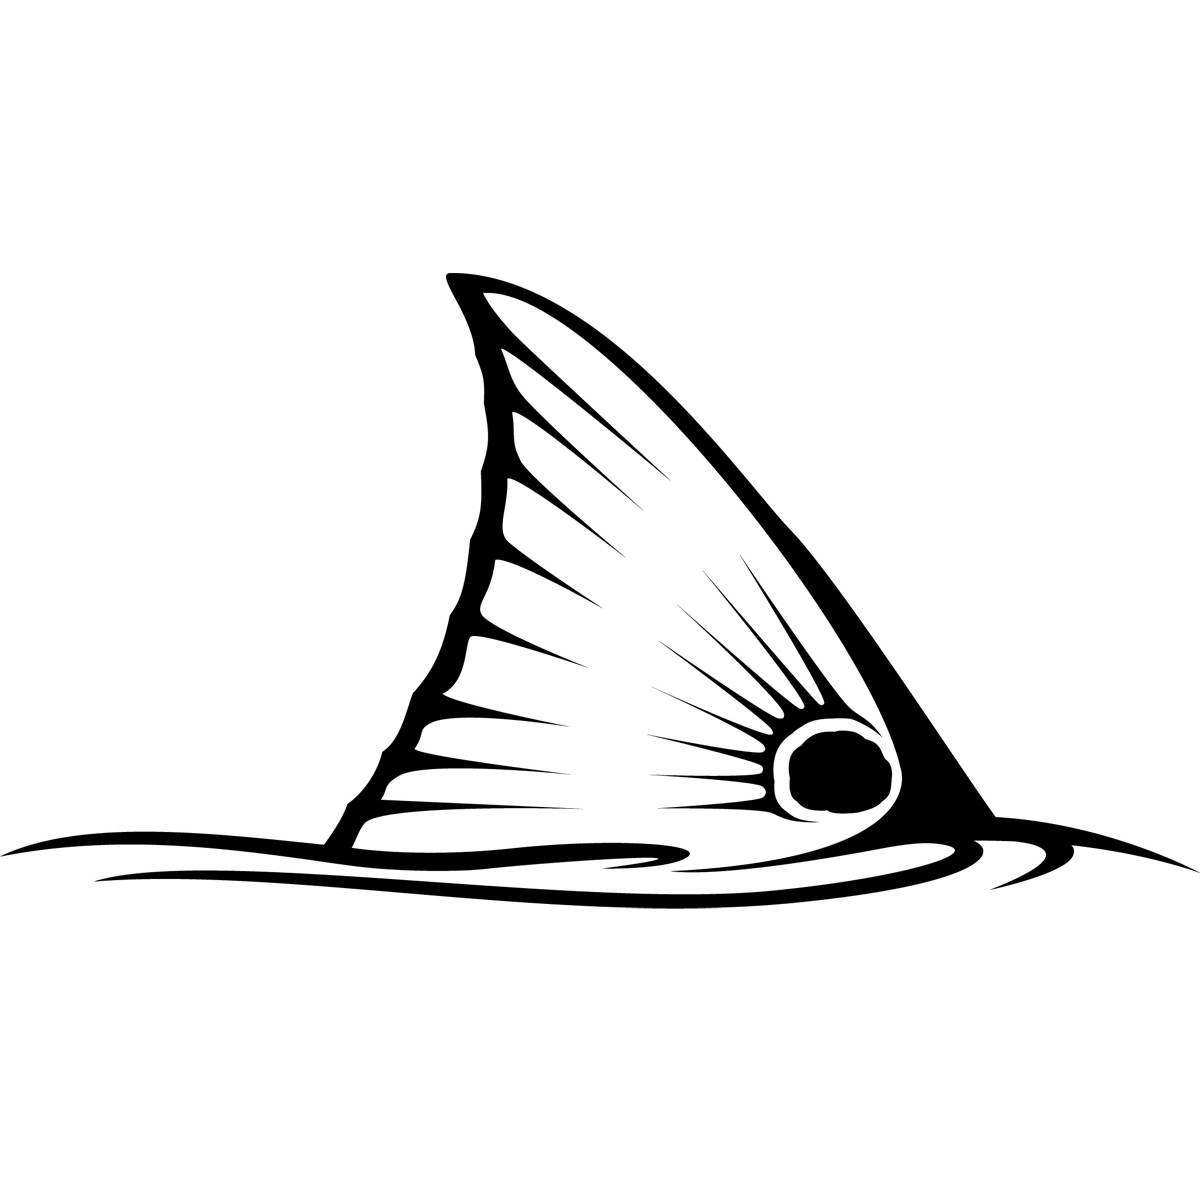 Redfish Tail Decal in Black by Skiff Life - Skiff Life